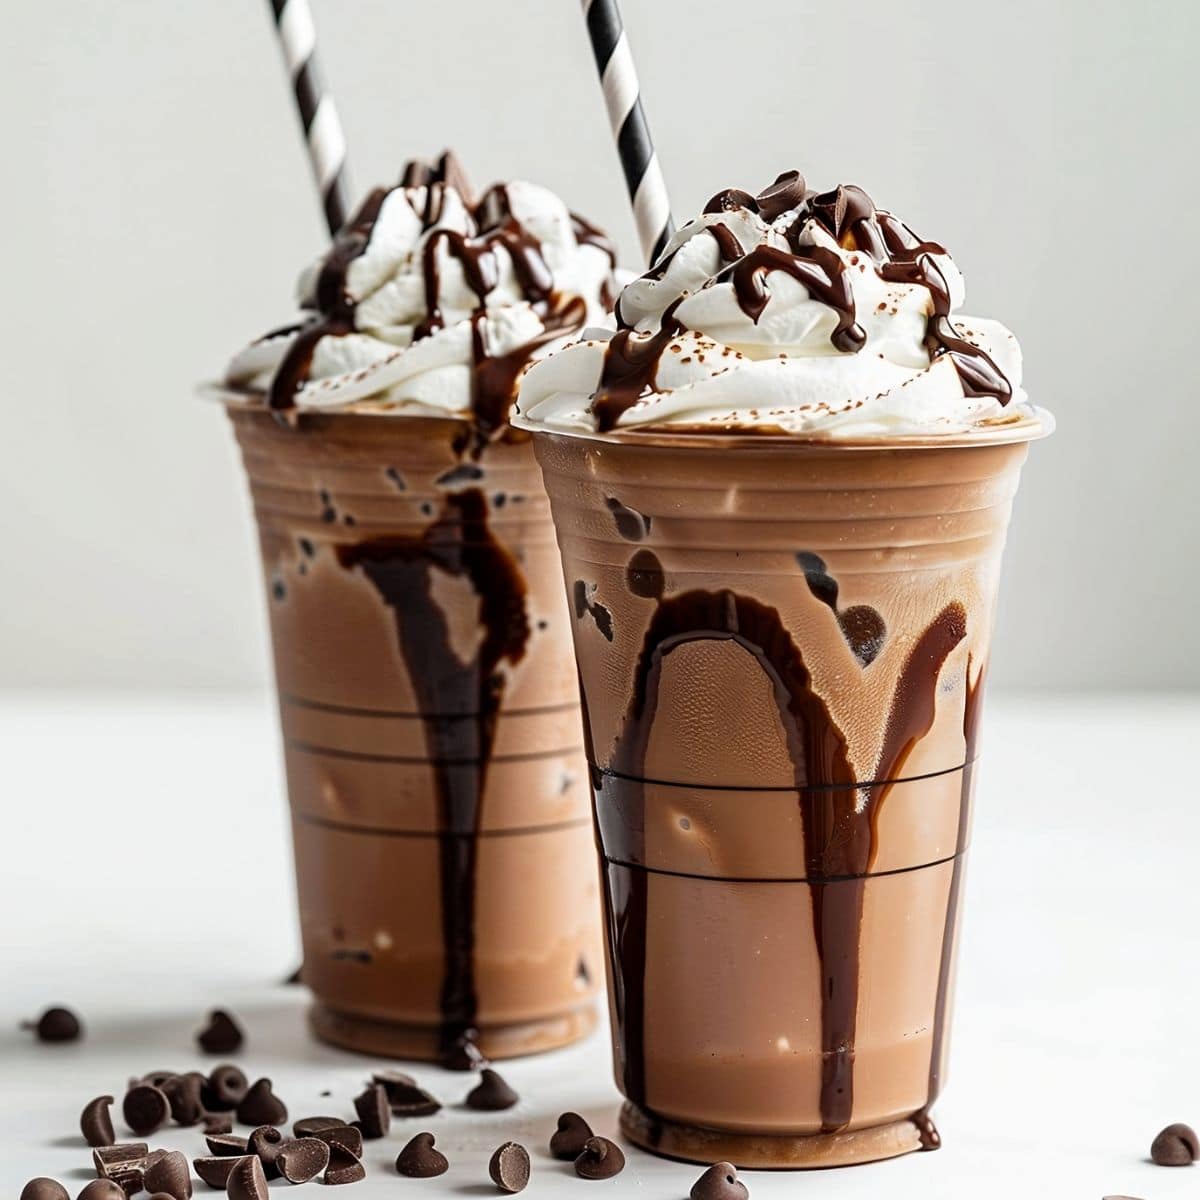 Two Plastic Cups of Starbucks Double Chocolate Chip Frappuccino with Whipped Cream, Chocolate Drizzle, and Chocolate Chips with a Striped Straw on a White Marble Table with Chocolate Chips